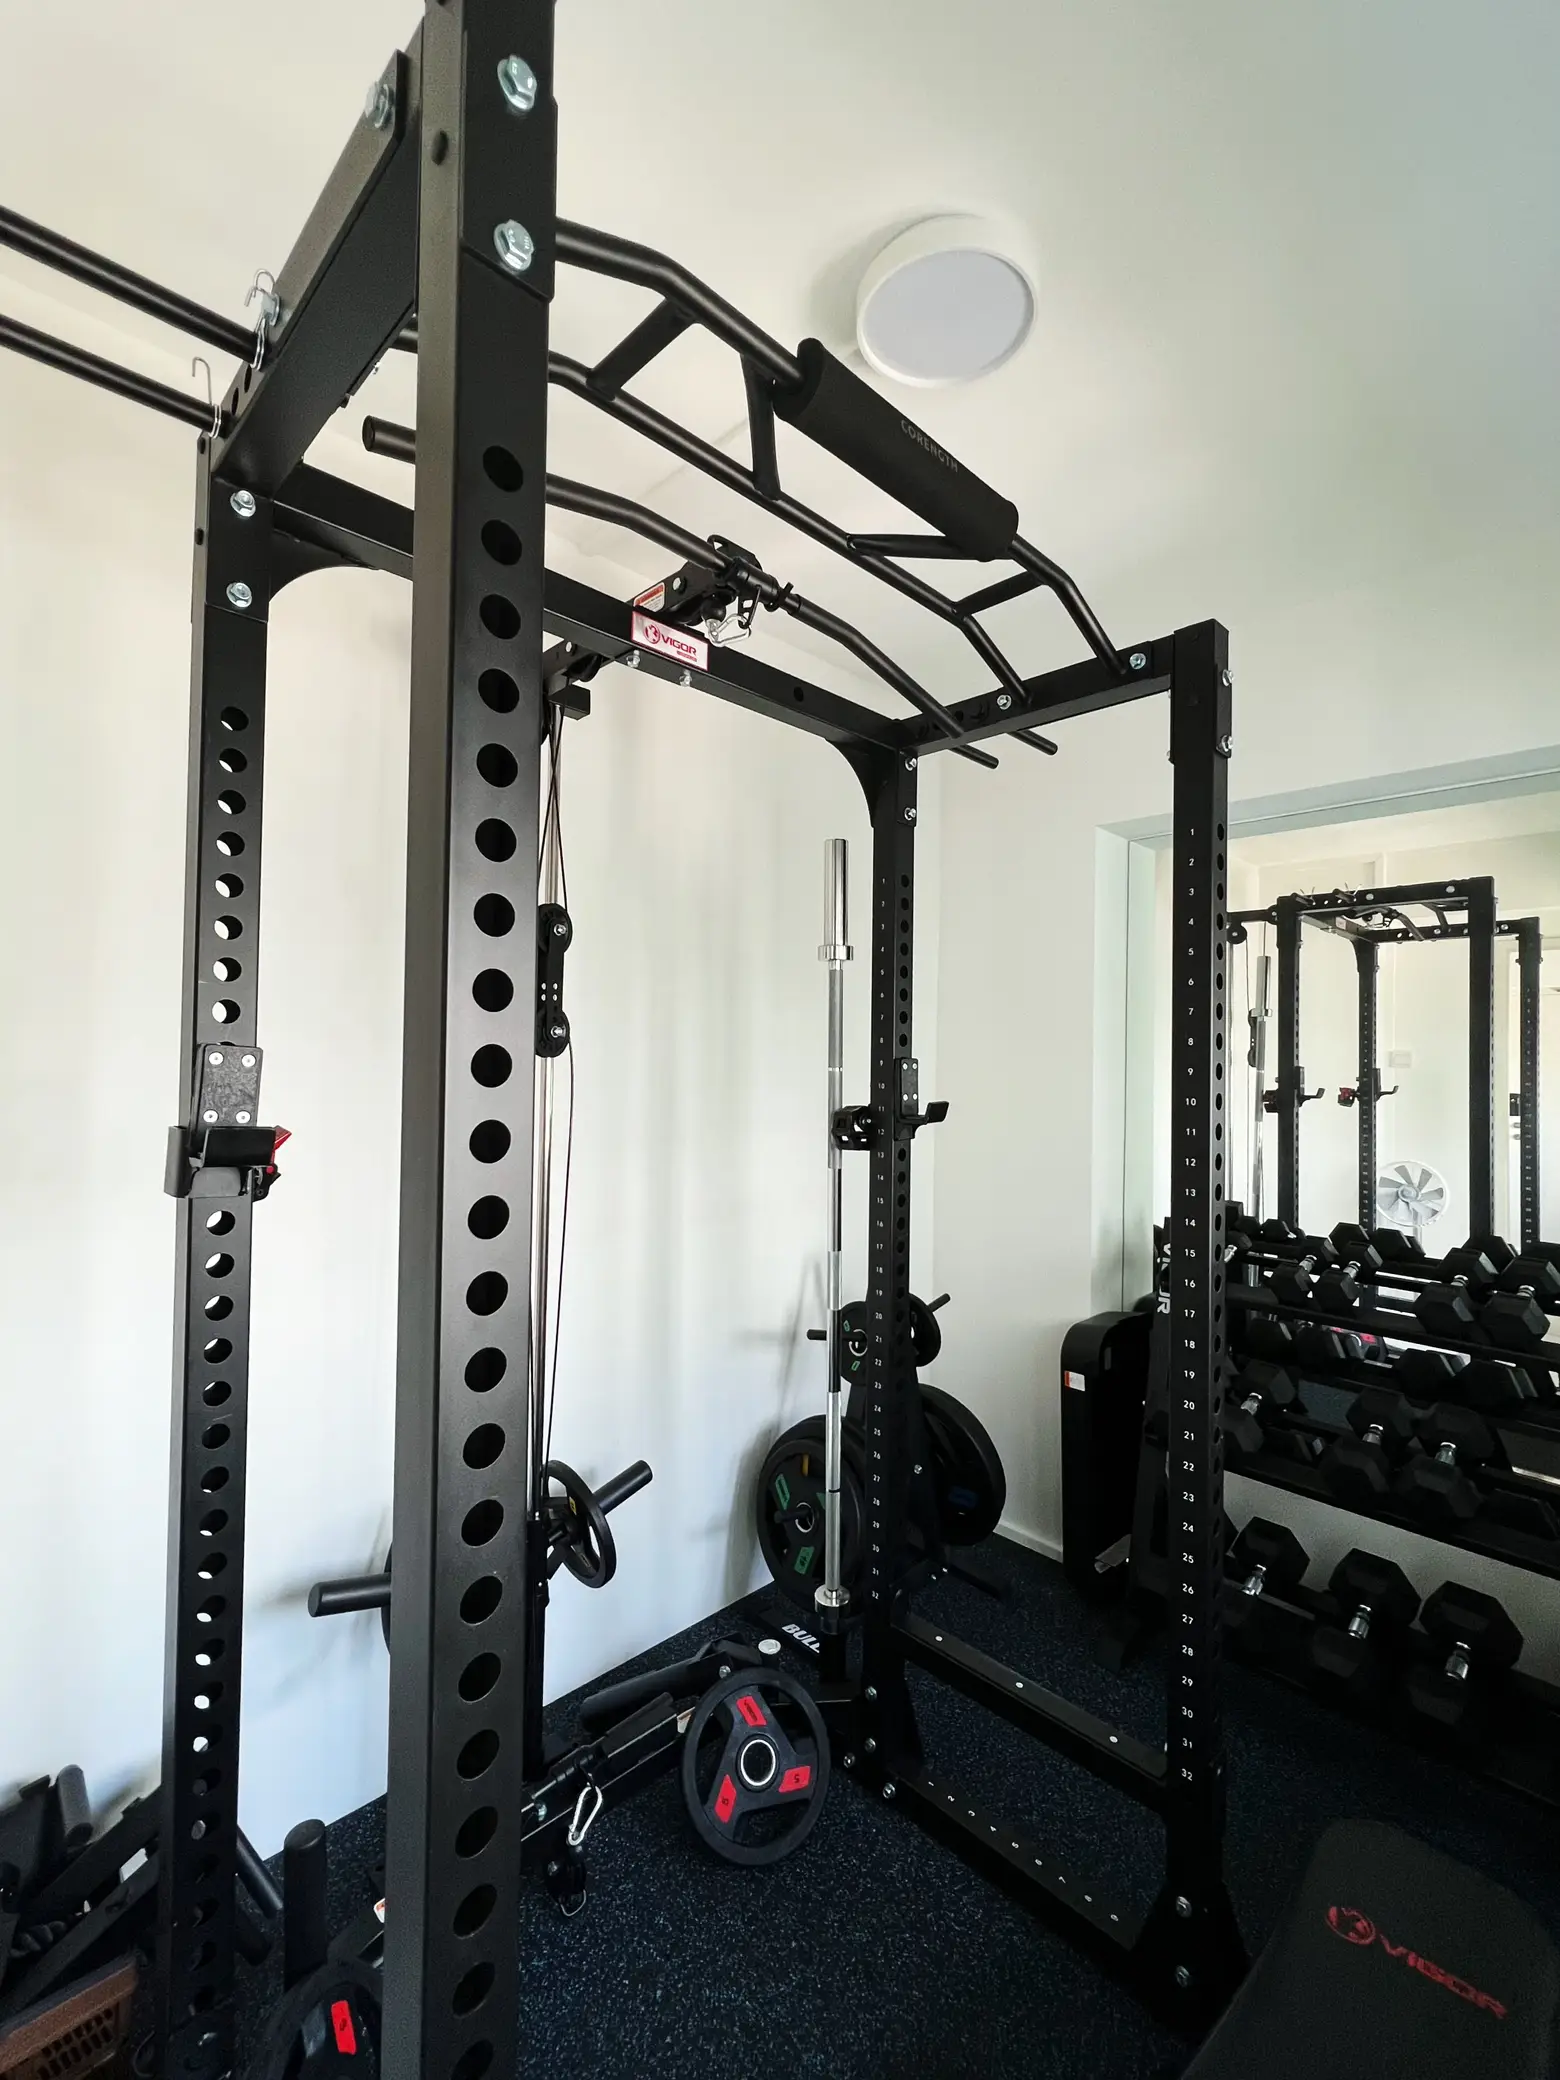 Fitness Accessories for Home Gym